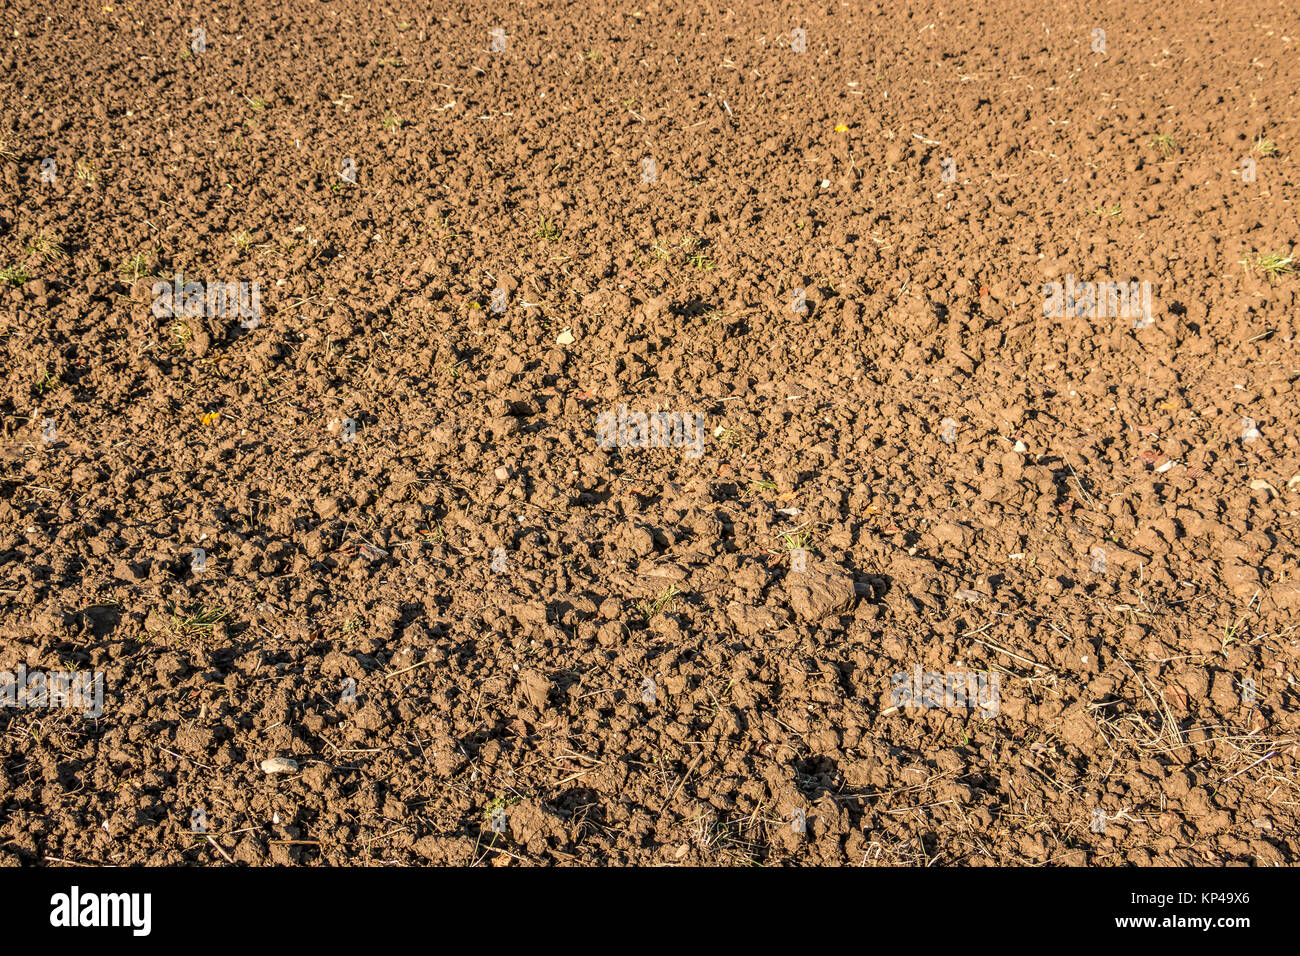 Fertile fields and green and brown soil Stock Photo